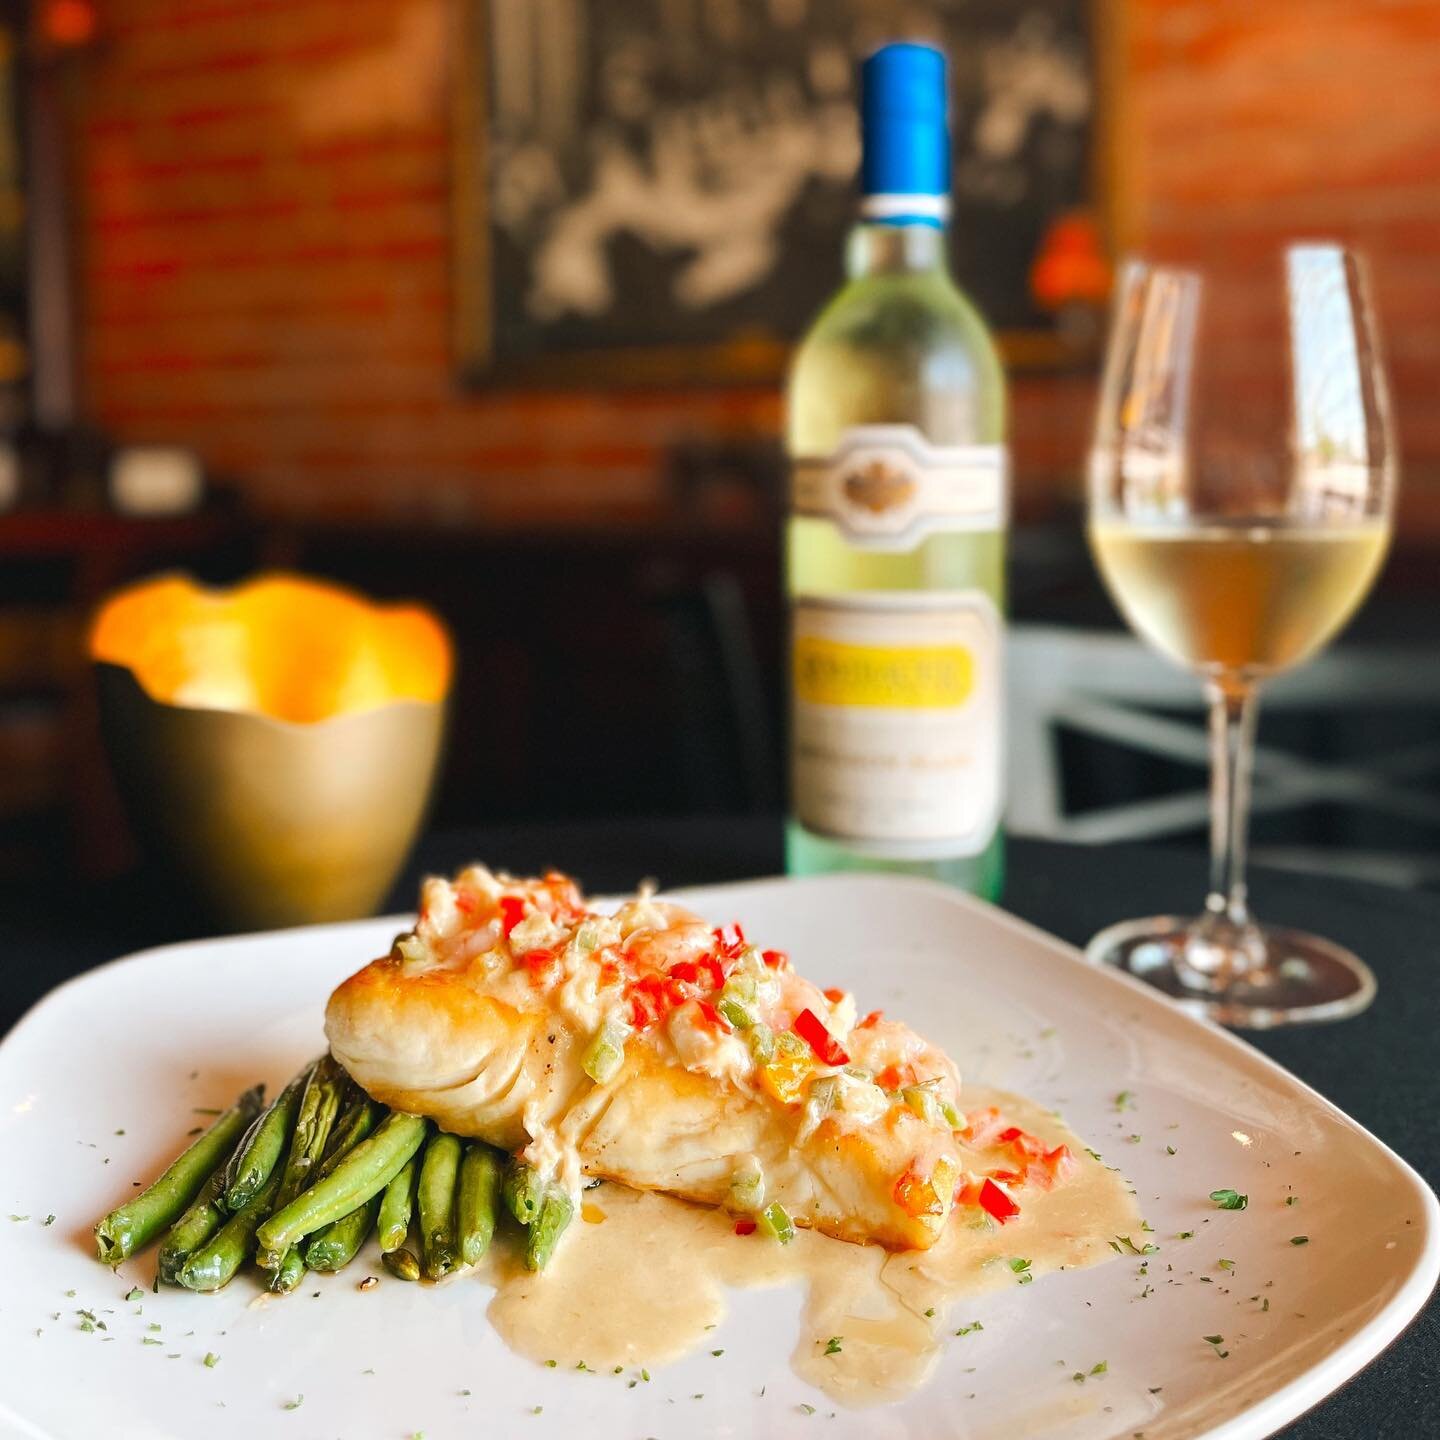 Delicious selections from the sea at Oklahoma&rsquo;s original prime steakhouse! Enjoy a pan seared halibut with saut&eacute;ed green beans, finished with a crab meat and petite shrimp lemon beurre blanc sauce! #SpeciallyCreated at @boulevardsteakhou